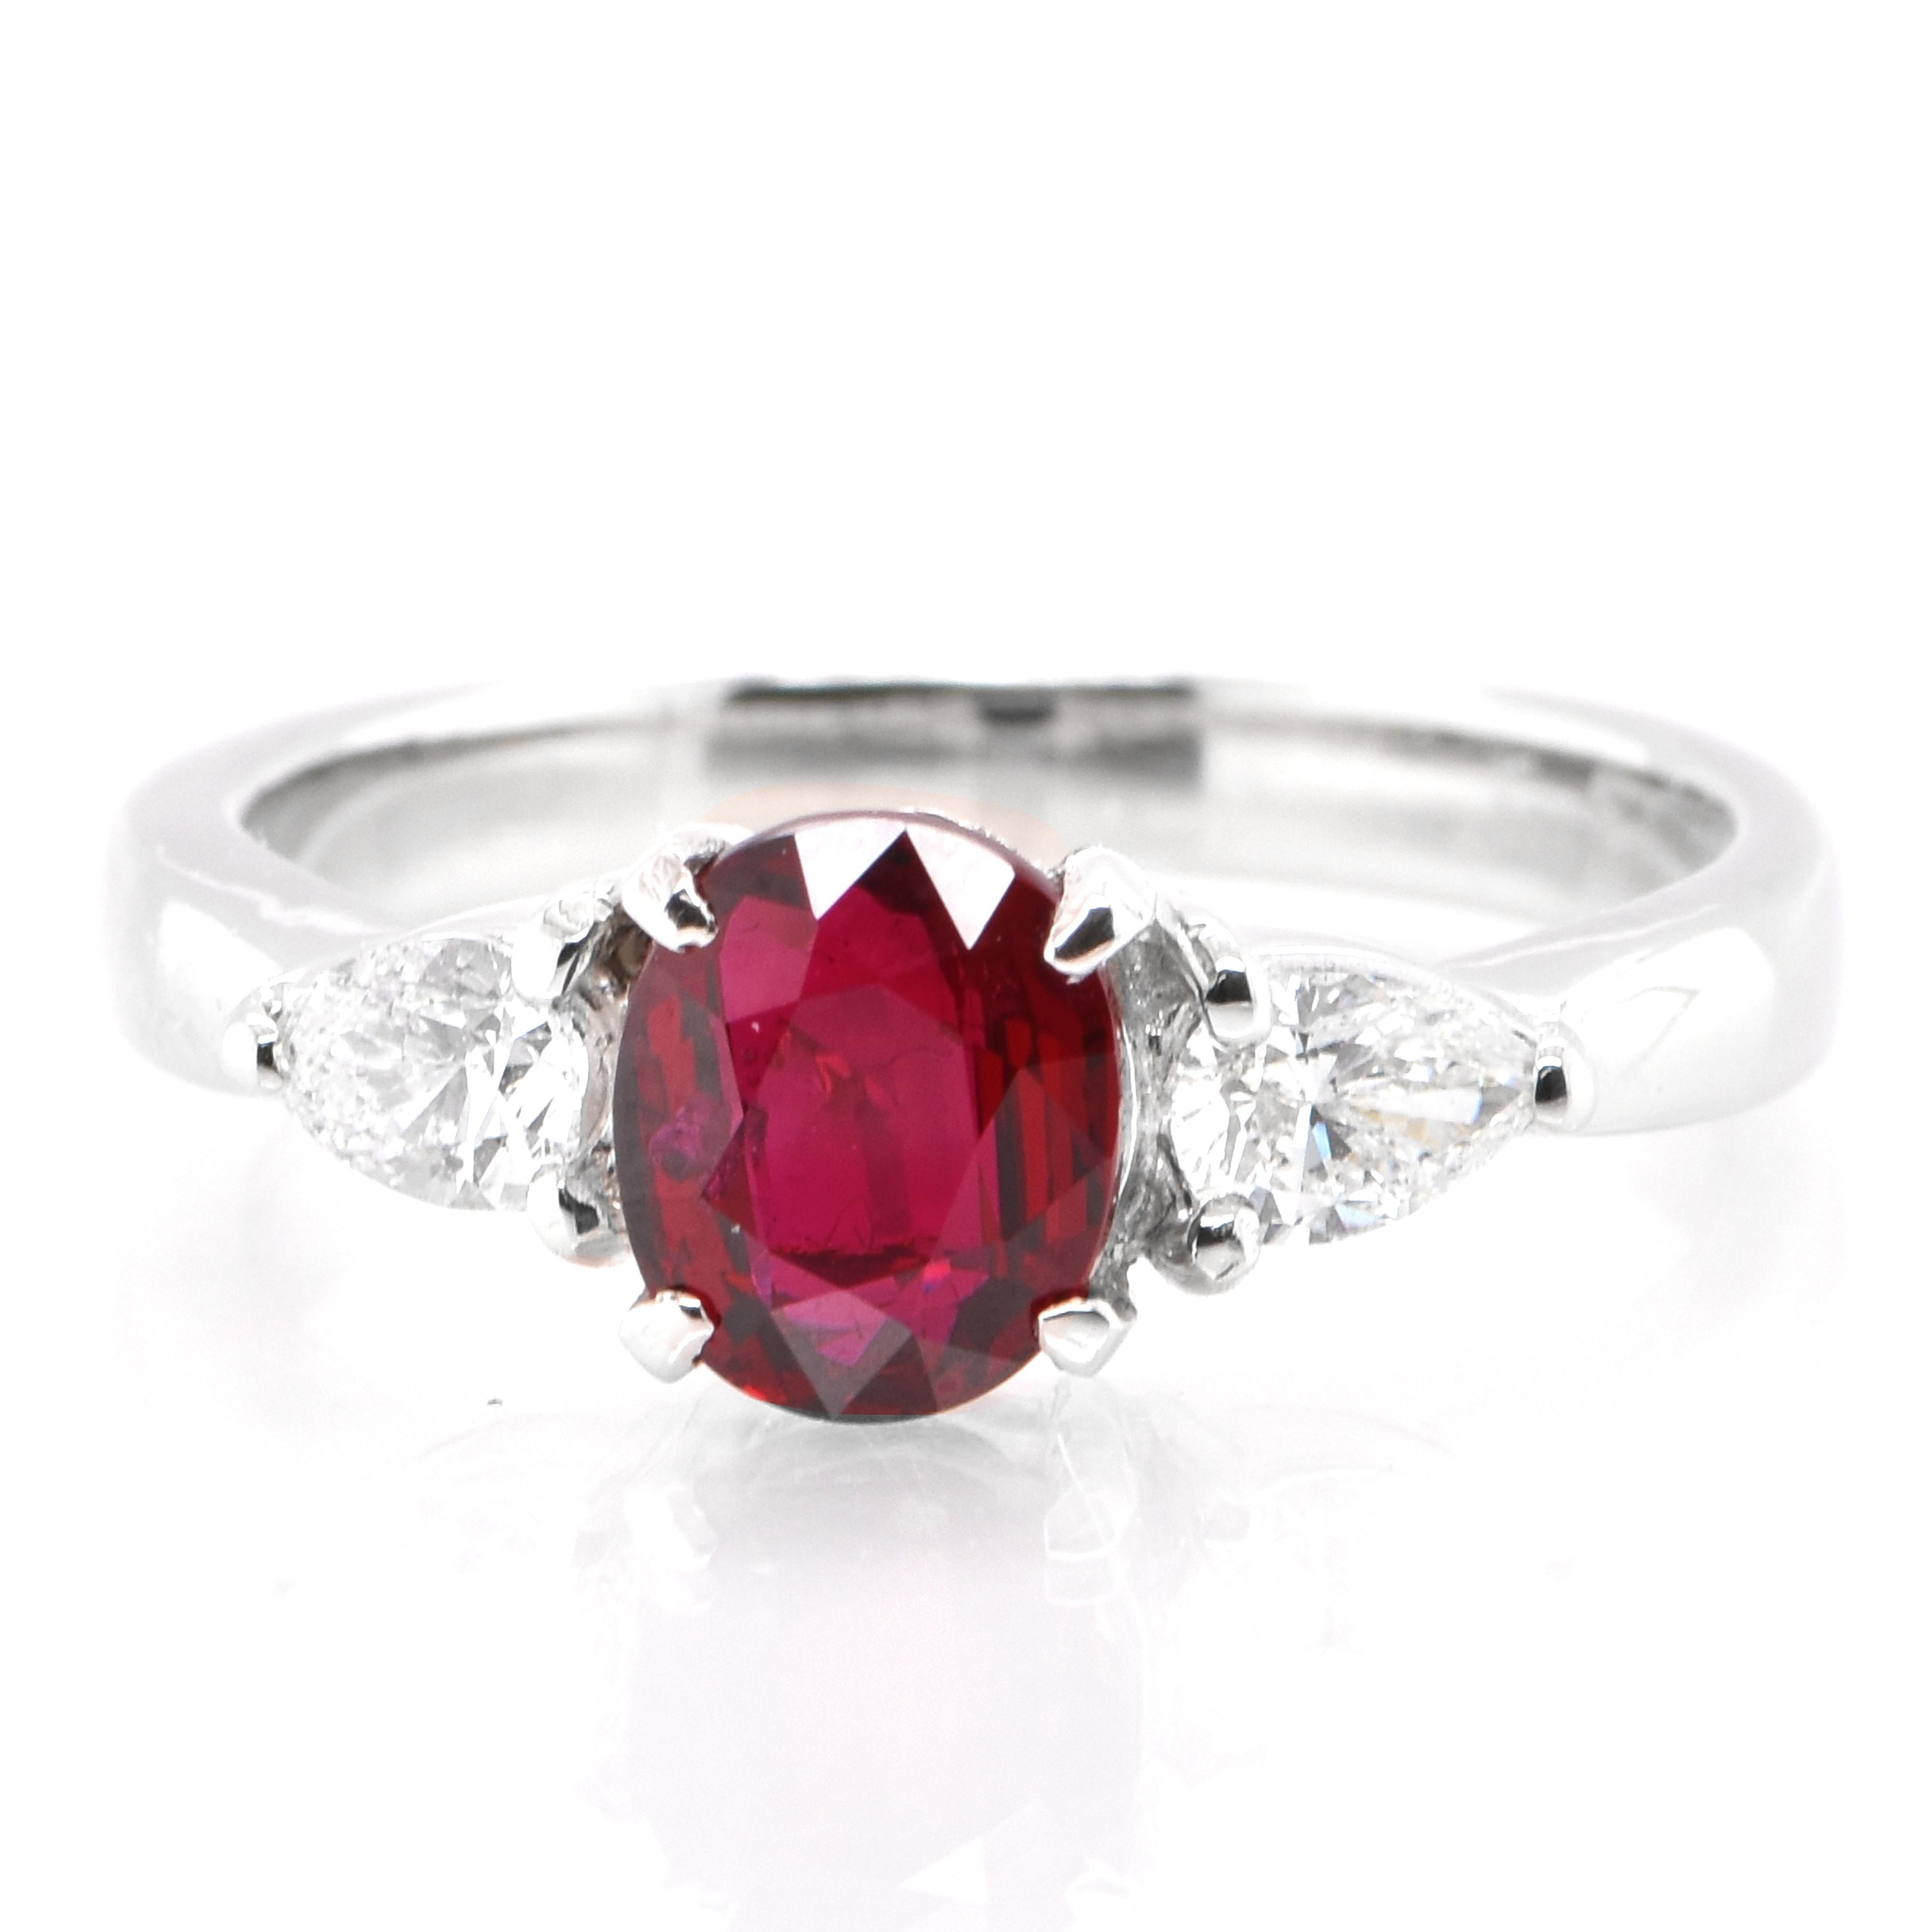 A beautiful ring set in Platinum featuring a 1.084 Carat Natural Ruby and 0.34 Carat Diamonds. Rubies are referred to as 